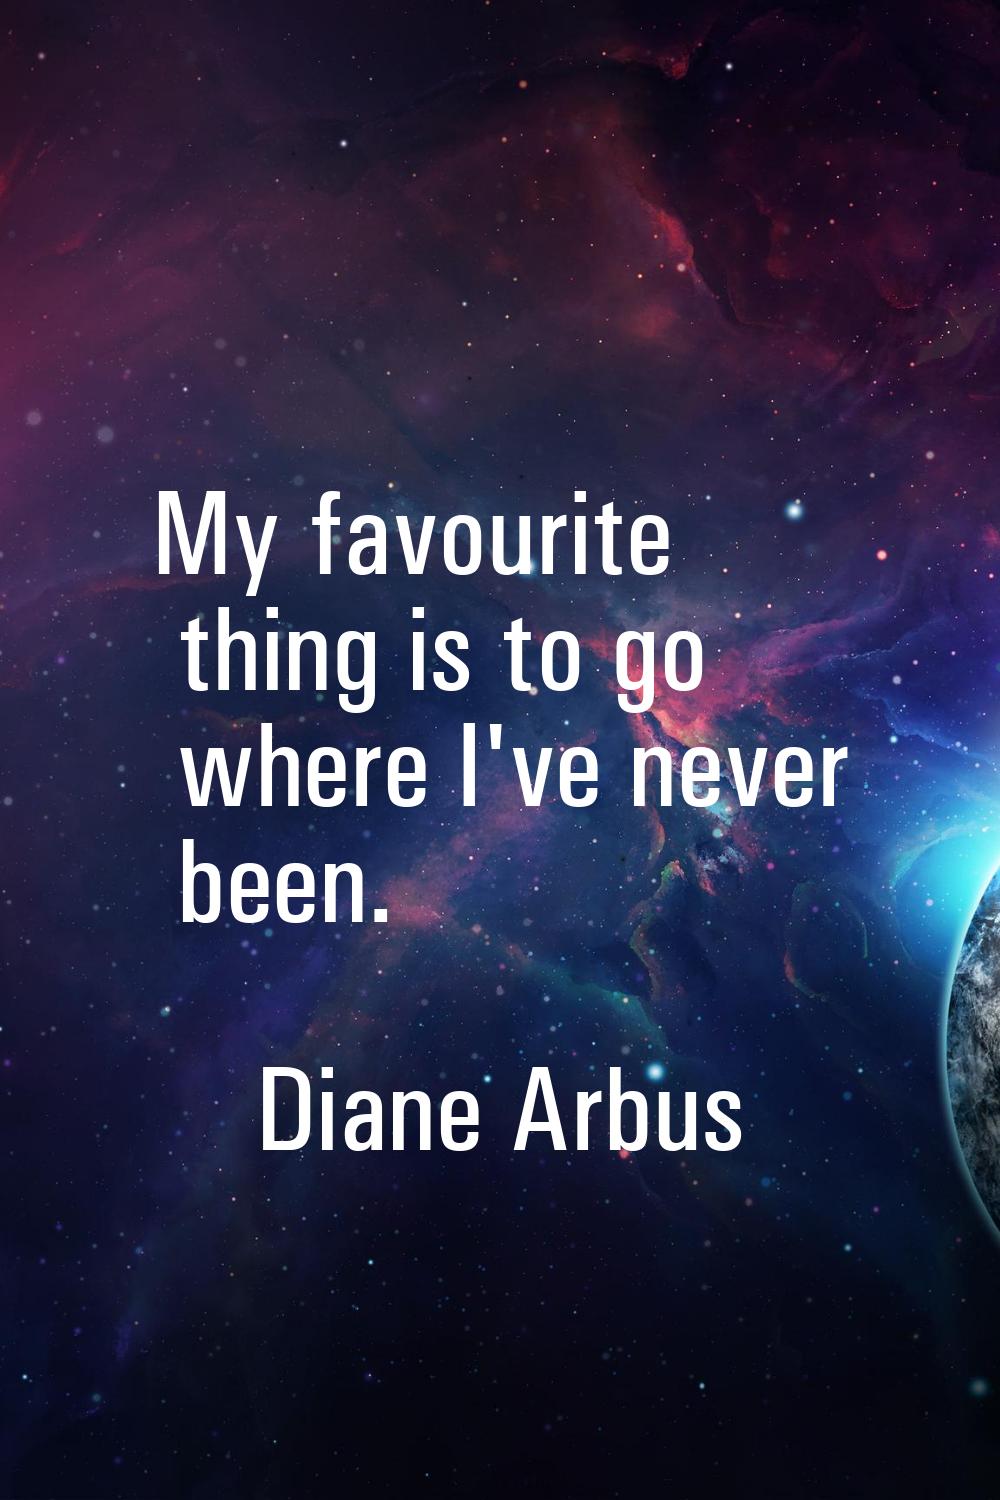 My favourite thing is to go where I've never been.